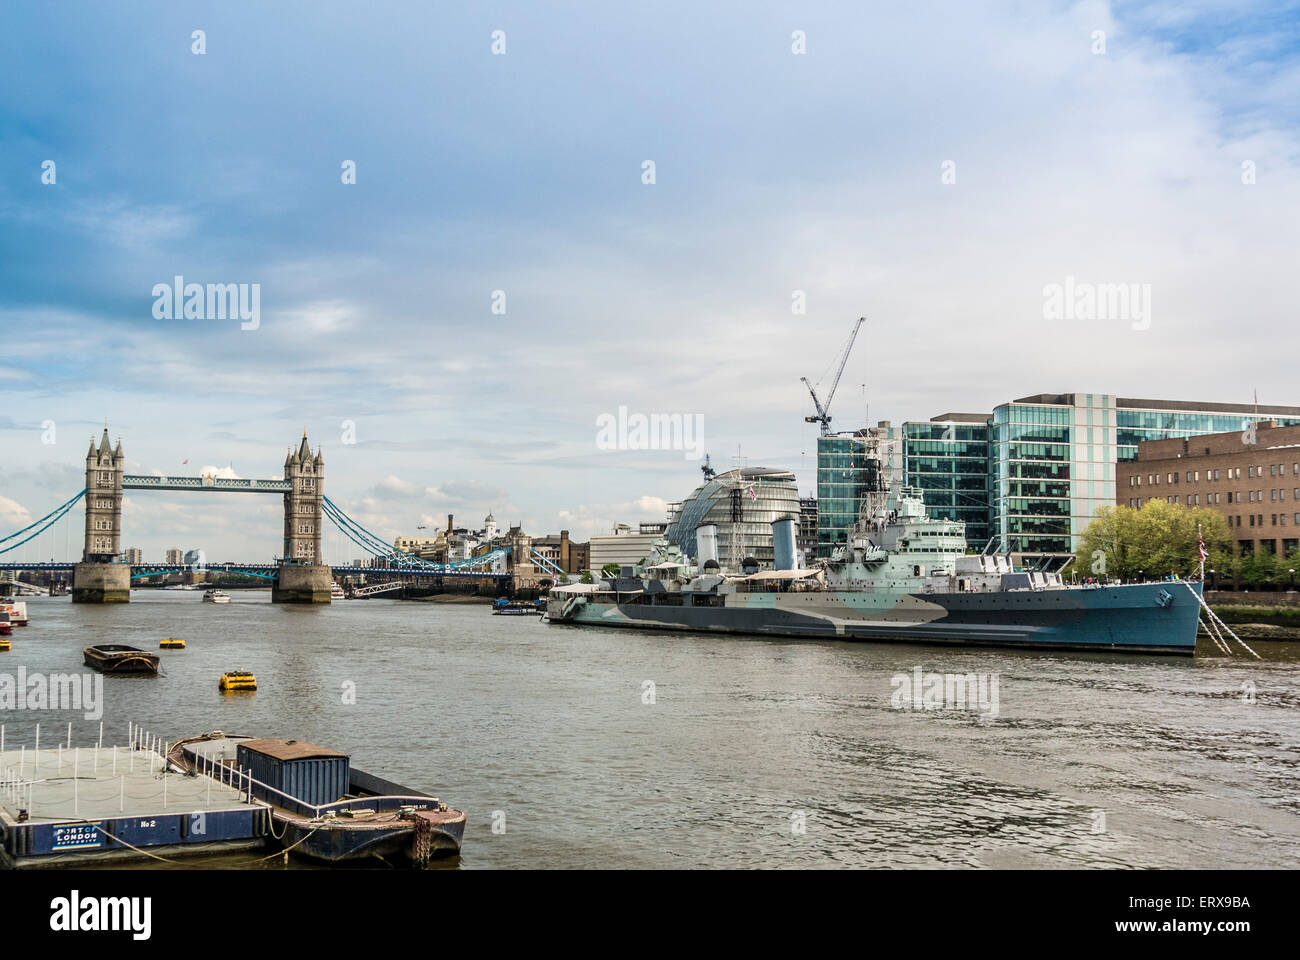 HMS Belfast on the River Thames, London, UK. Tower Bridge in background. Stock Photo